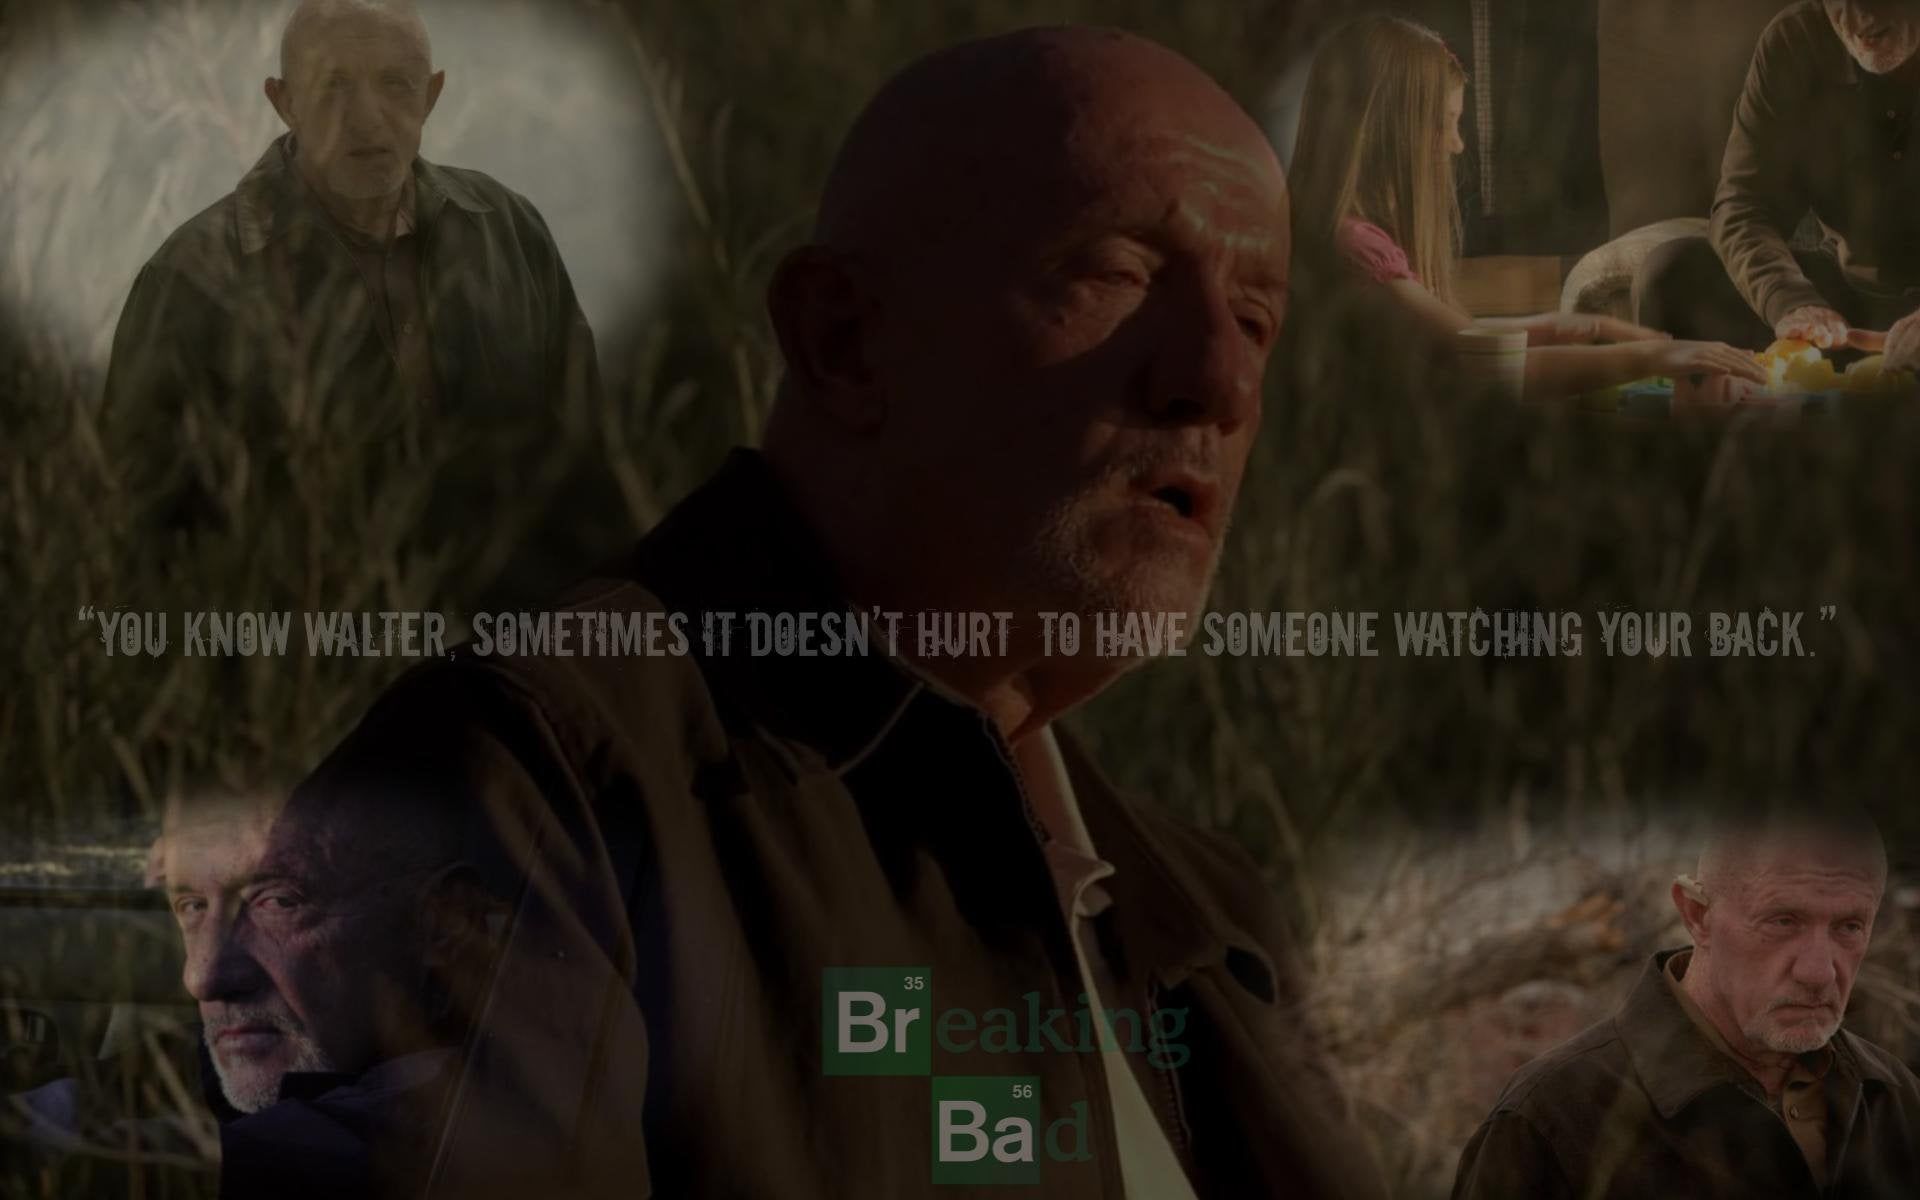 Wallpaper I made in tribute to Mike Ehrmantraut